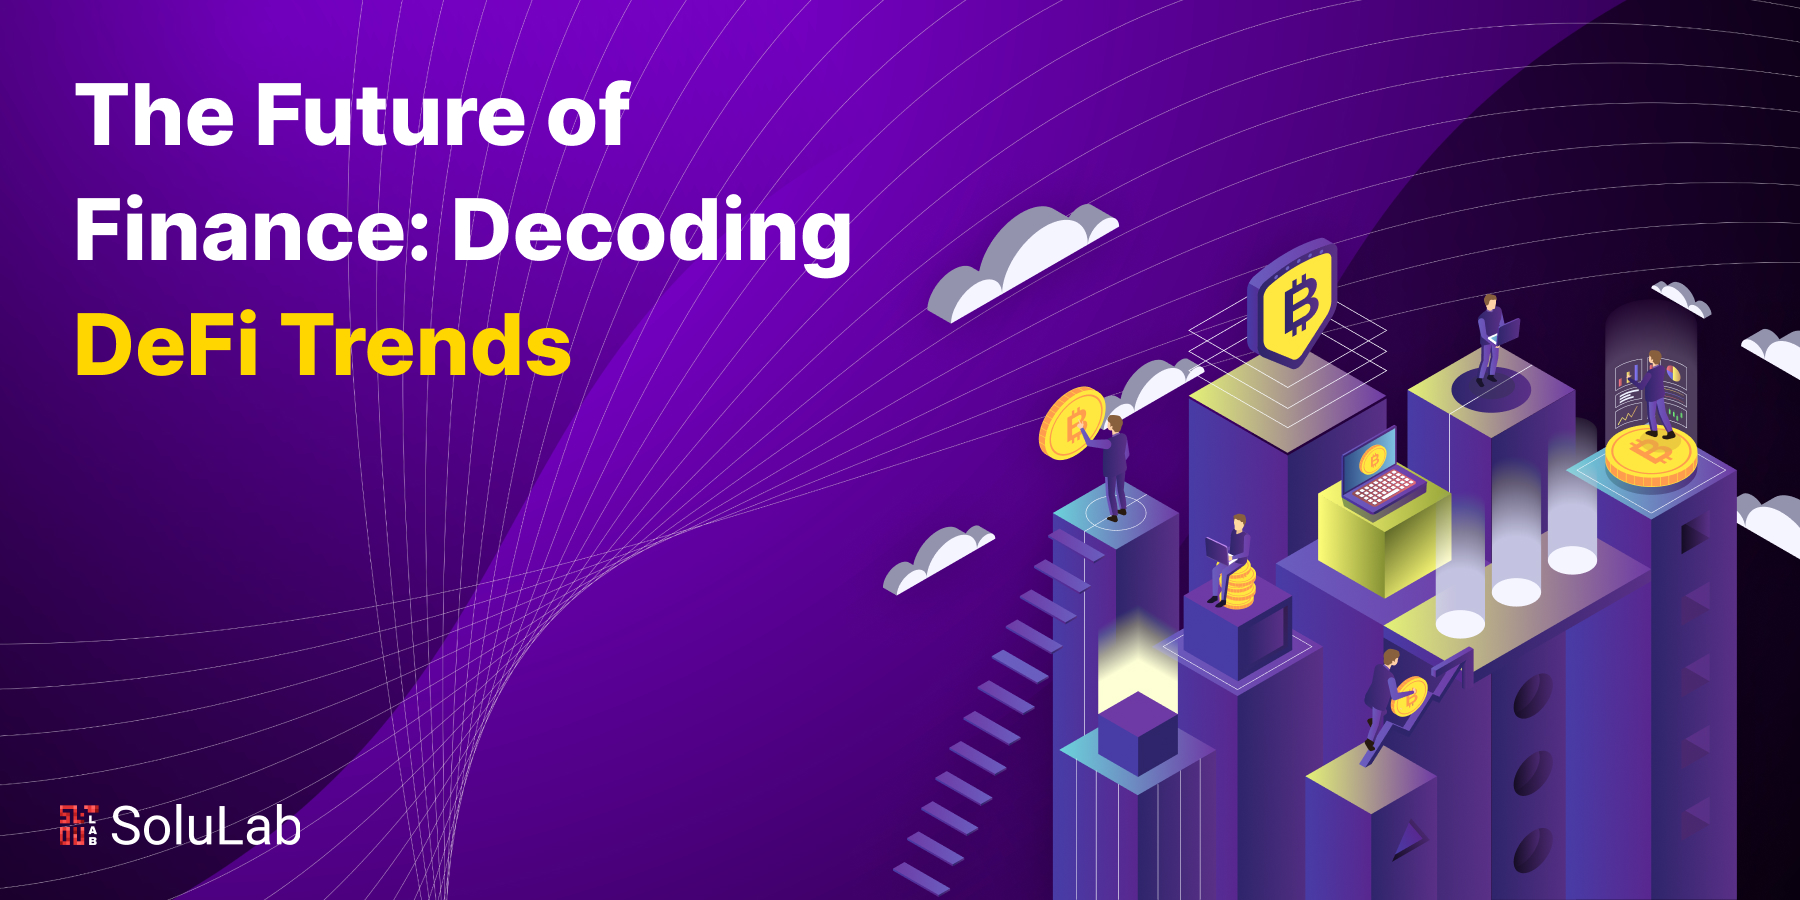 The Future of Finance: Decoding DeFi Trends